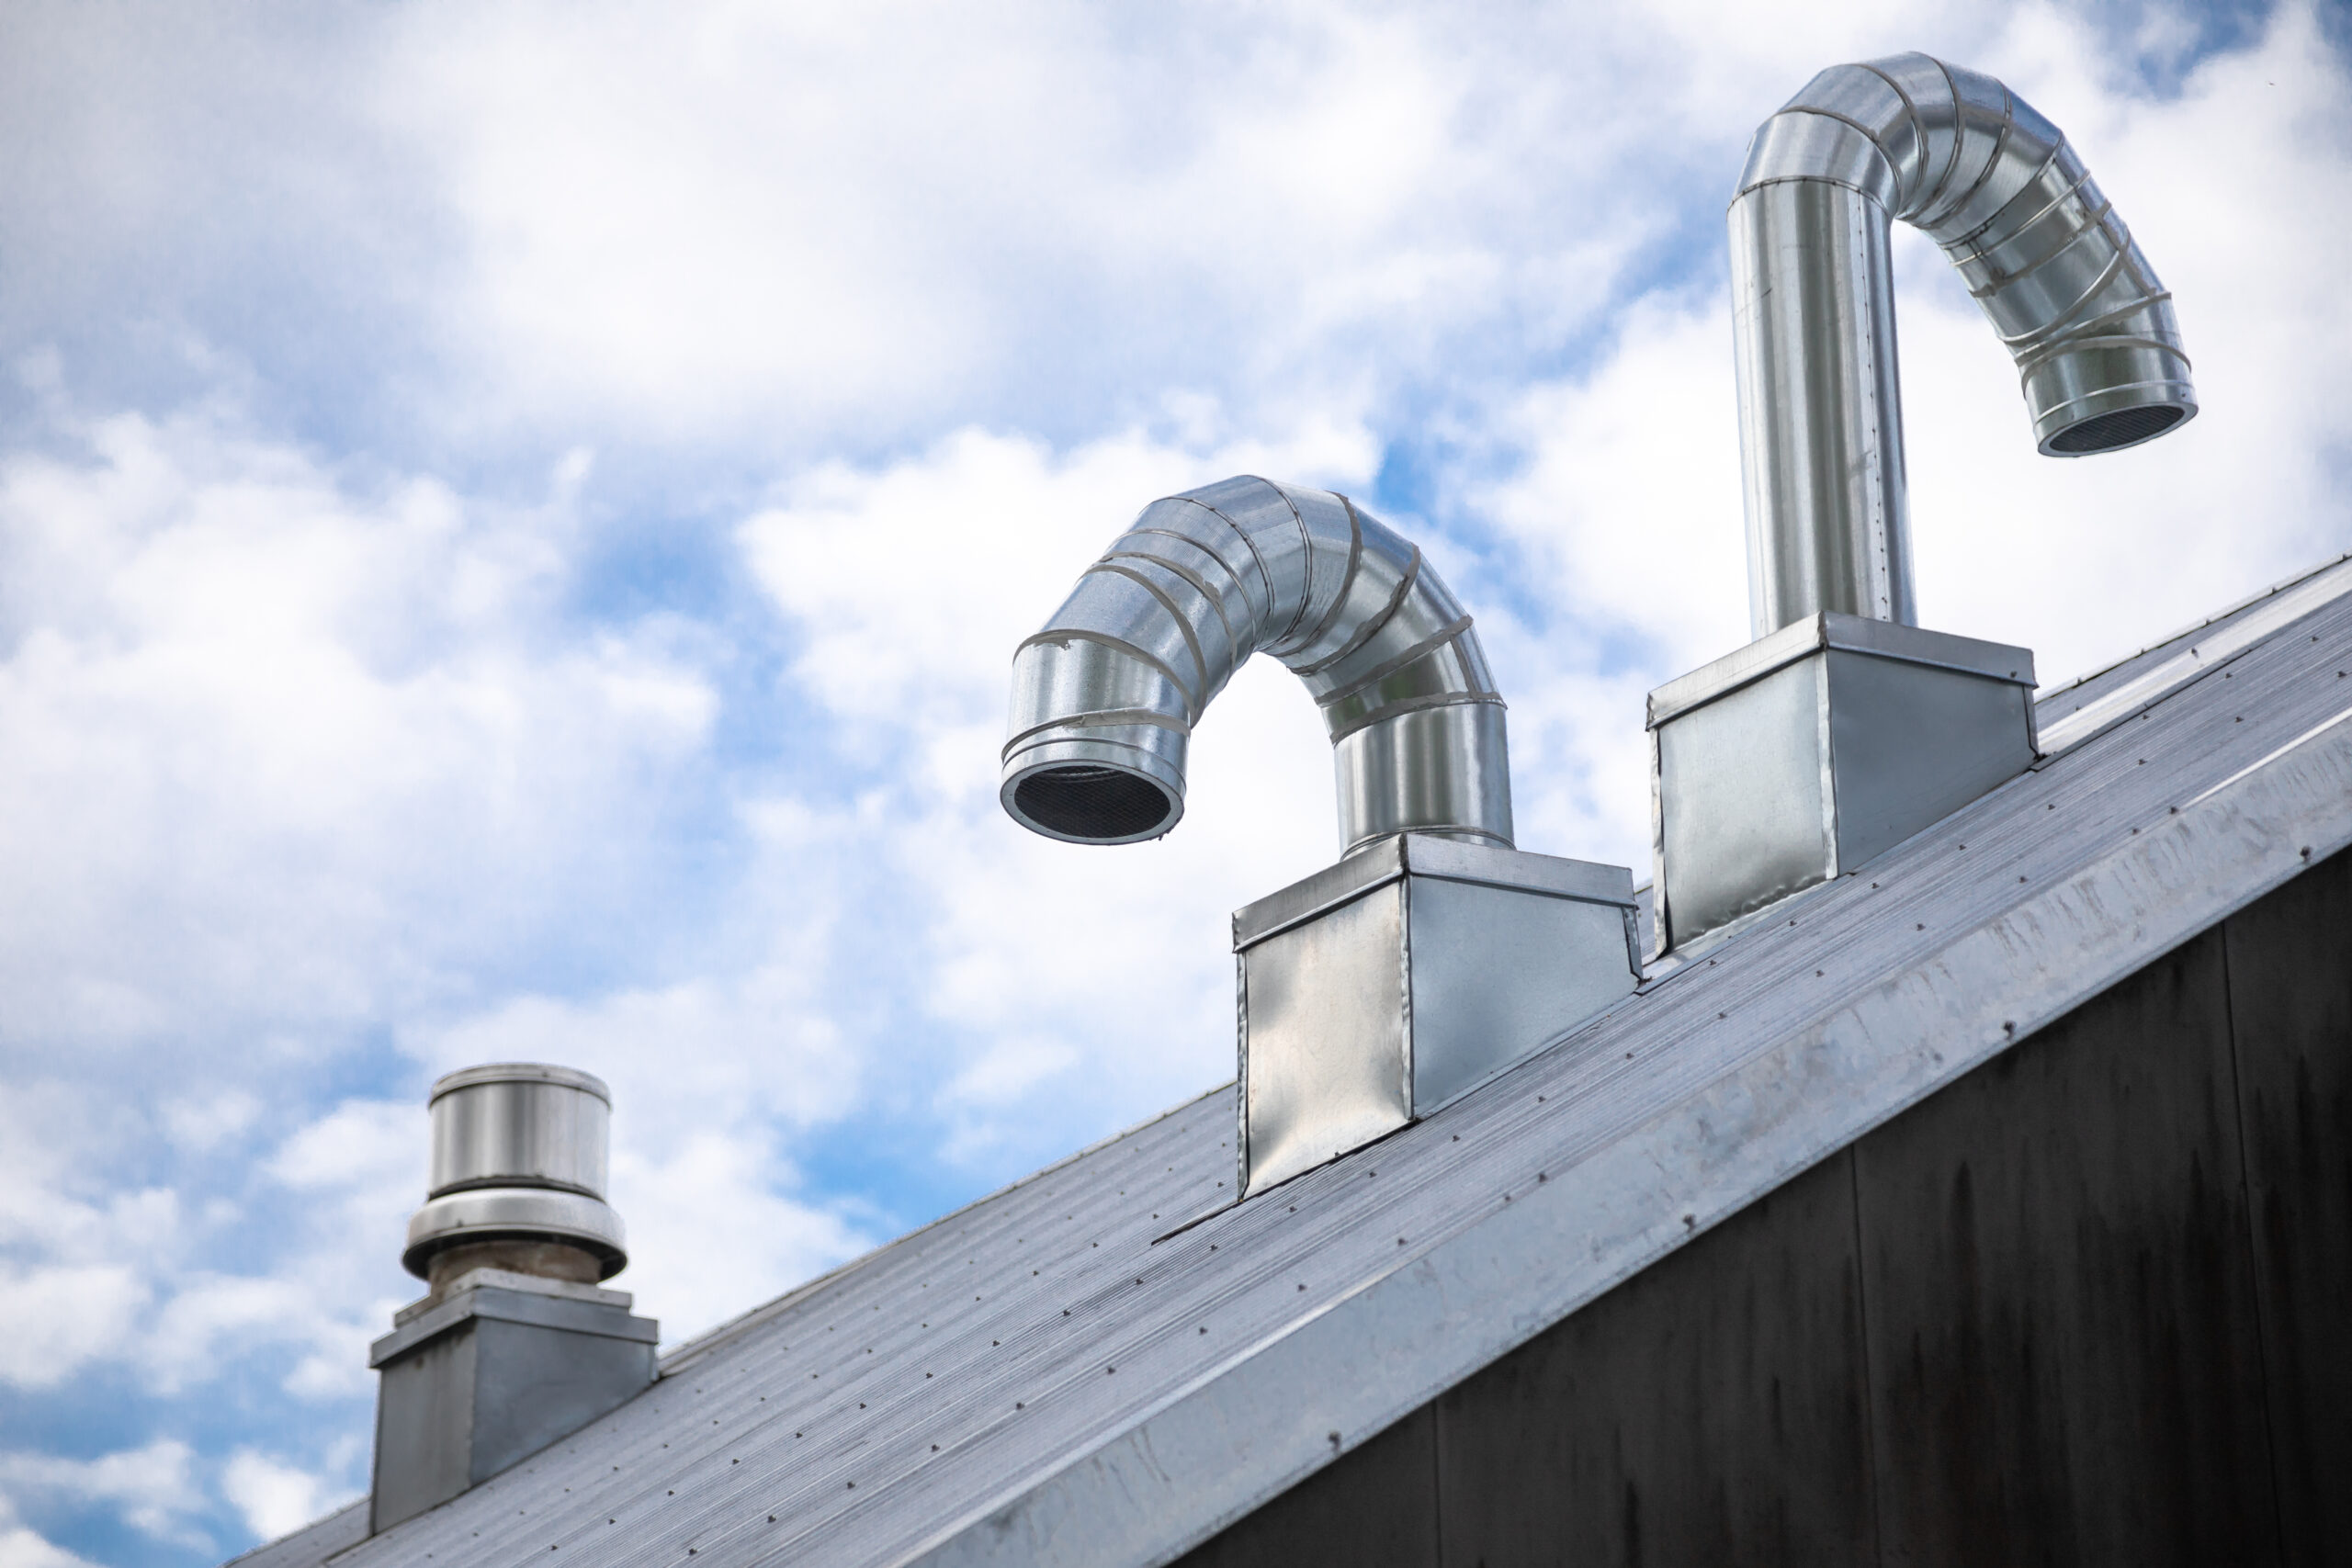 Side view of an aluminum chimney and ducting vents on the roof of an industrial building. 